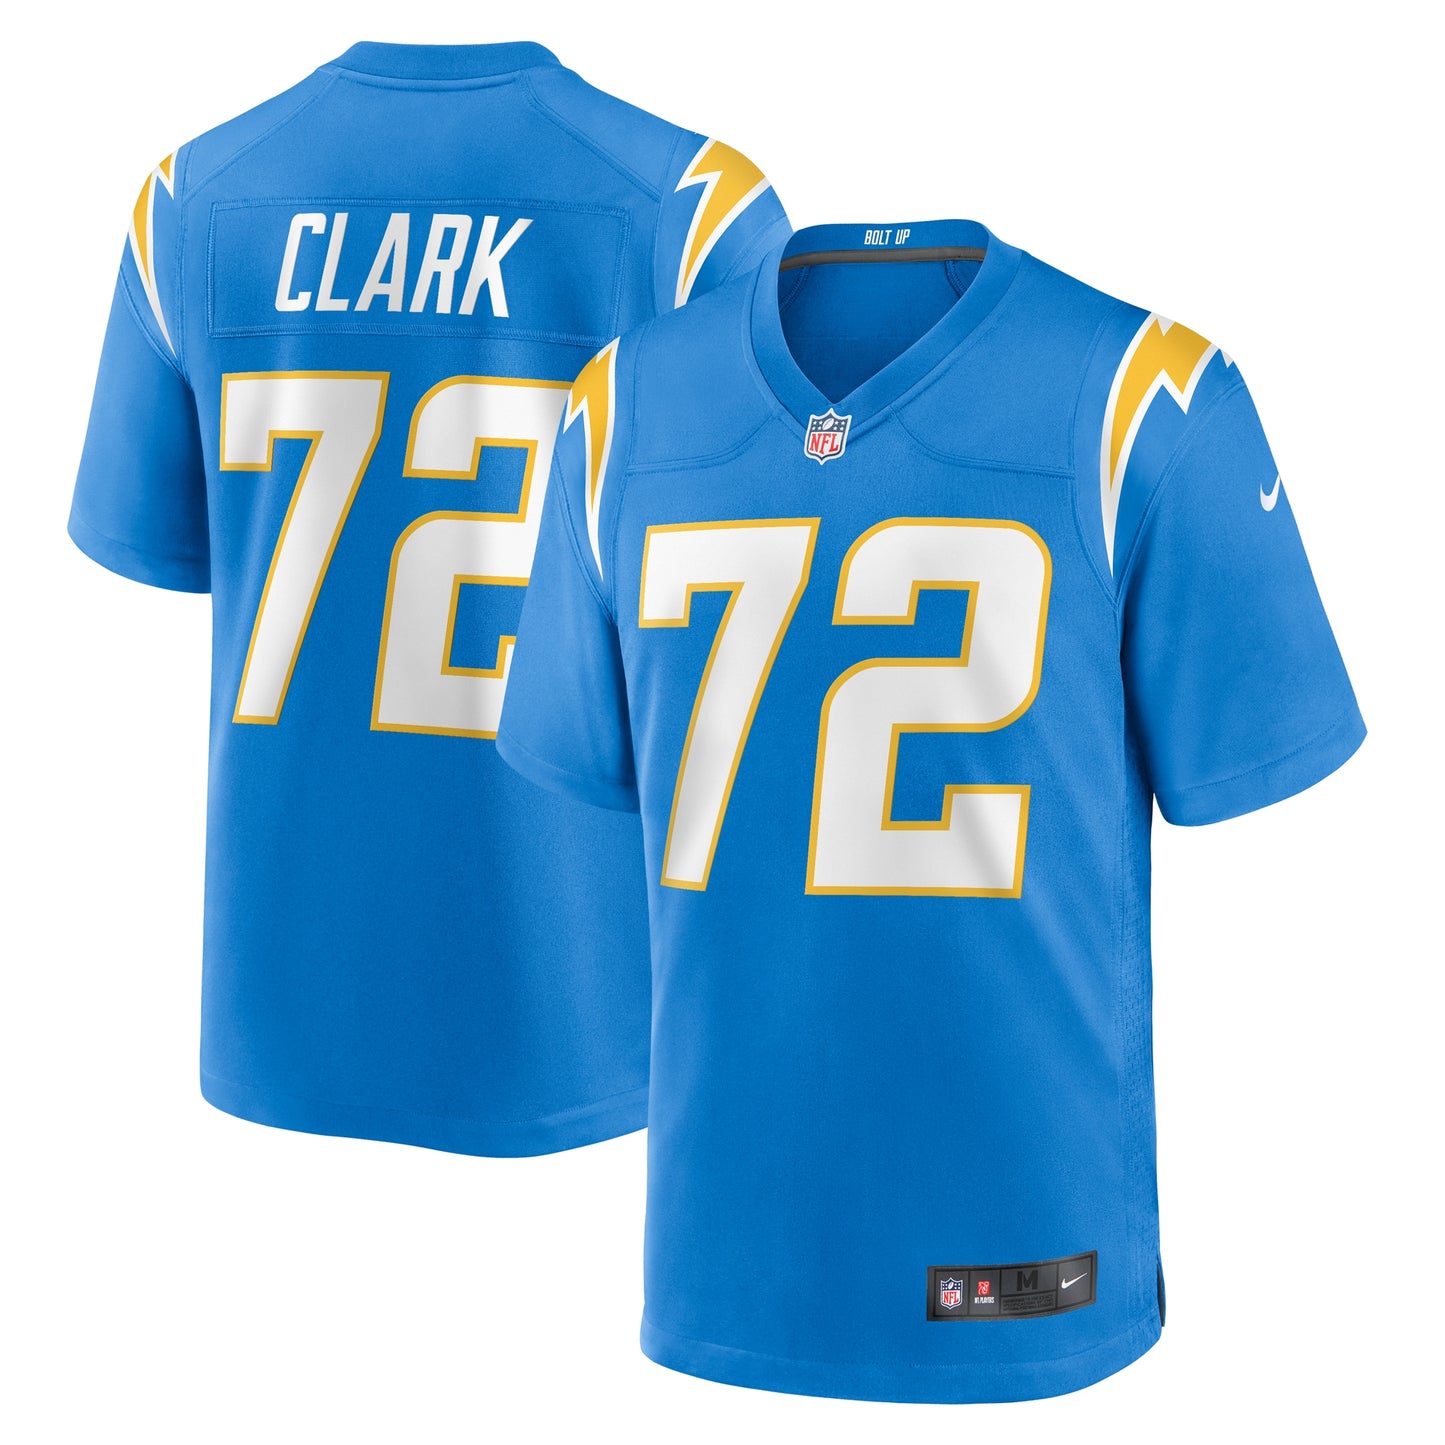 Jerrod Clark Los Angeles Chargers Nike Team Game Jersey - Powder Blue